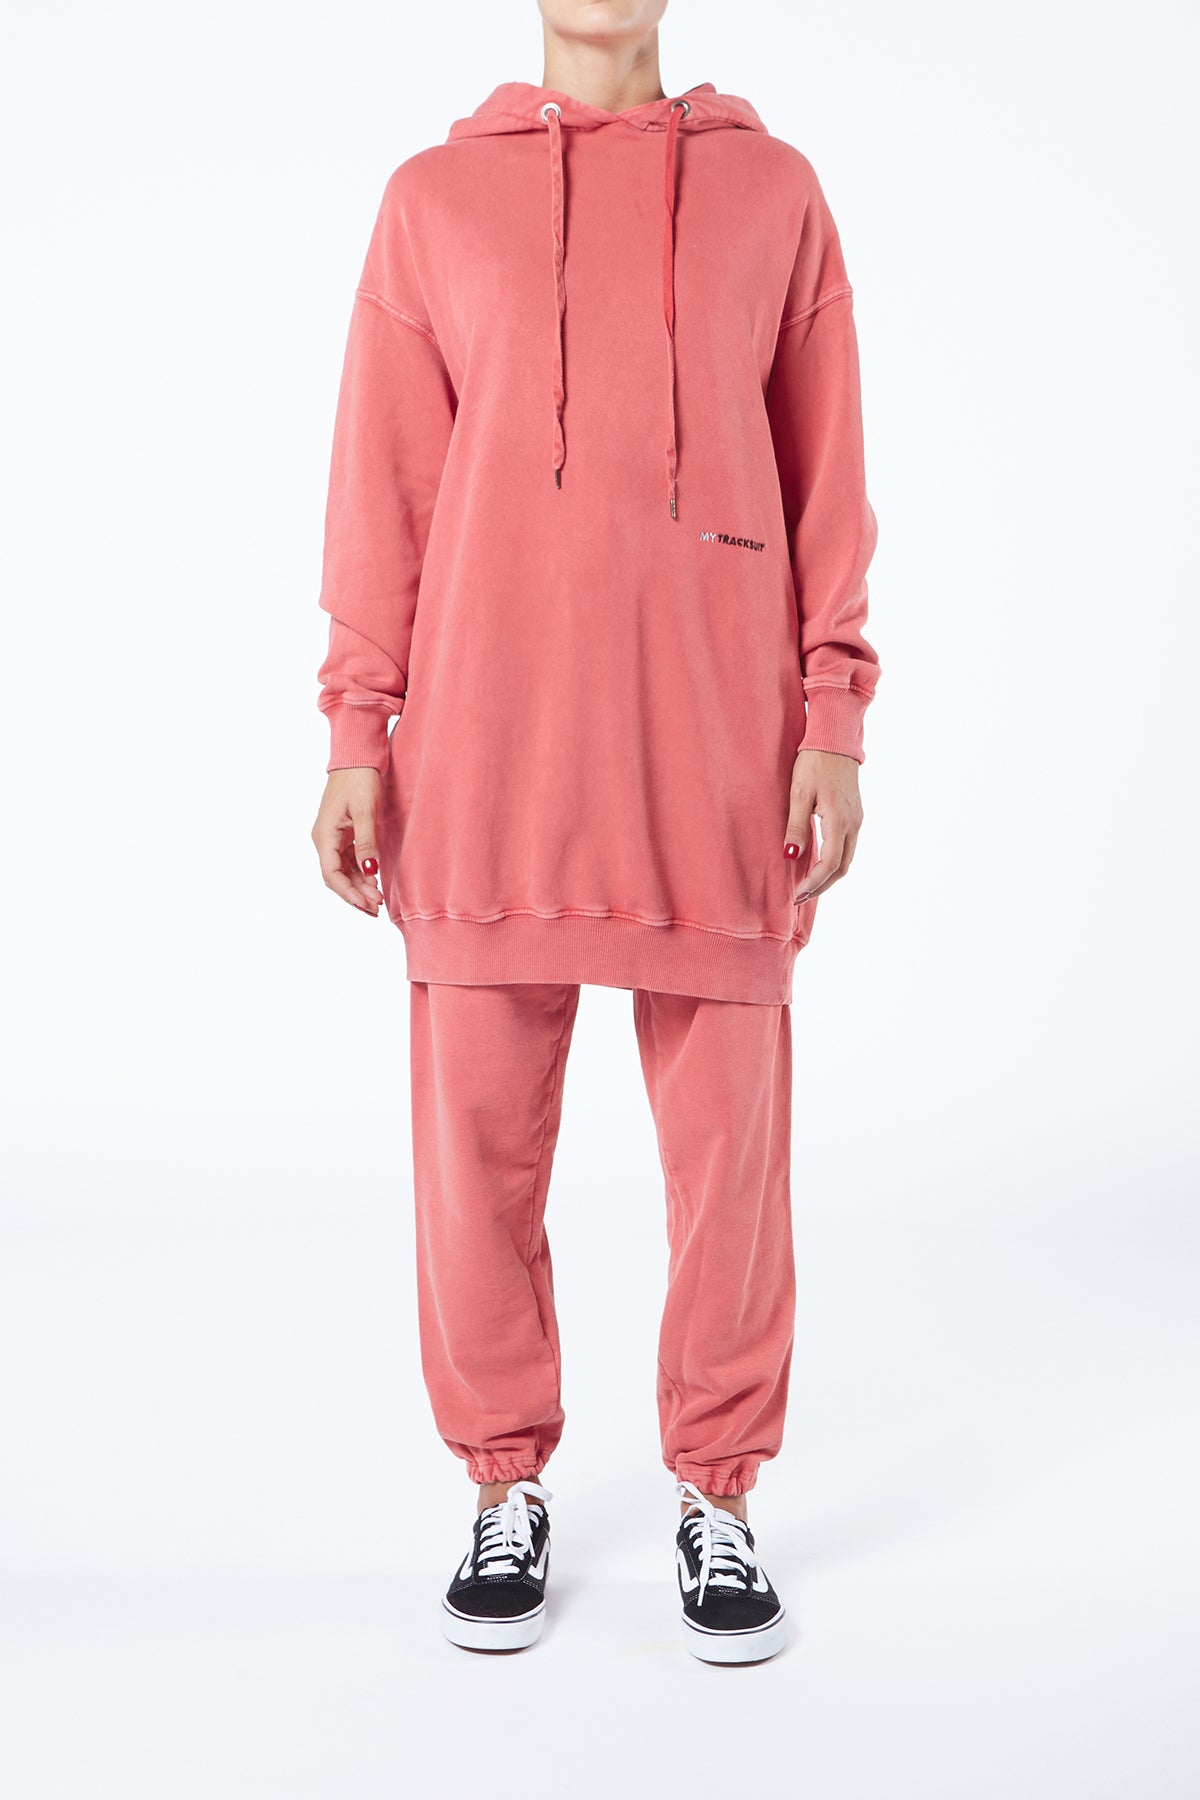 MYTRACKSUIT - LONG OVER HOODIE SWEATER/JOGGER PANTS RED